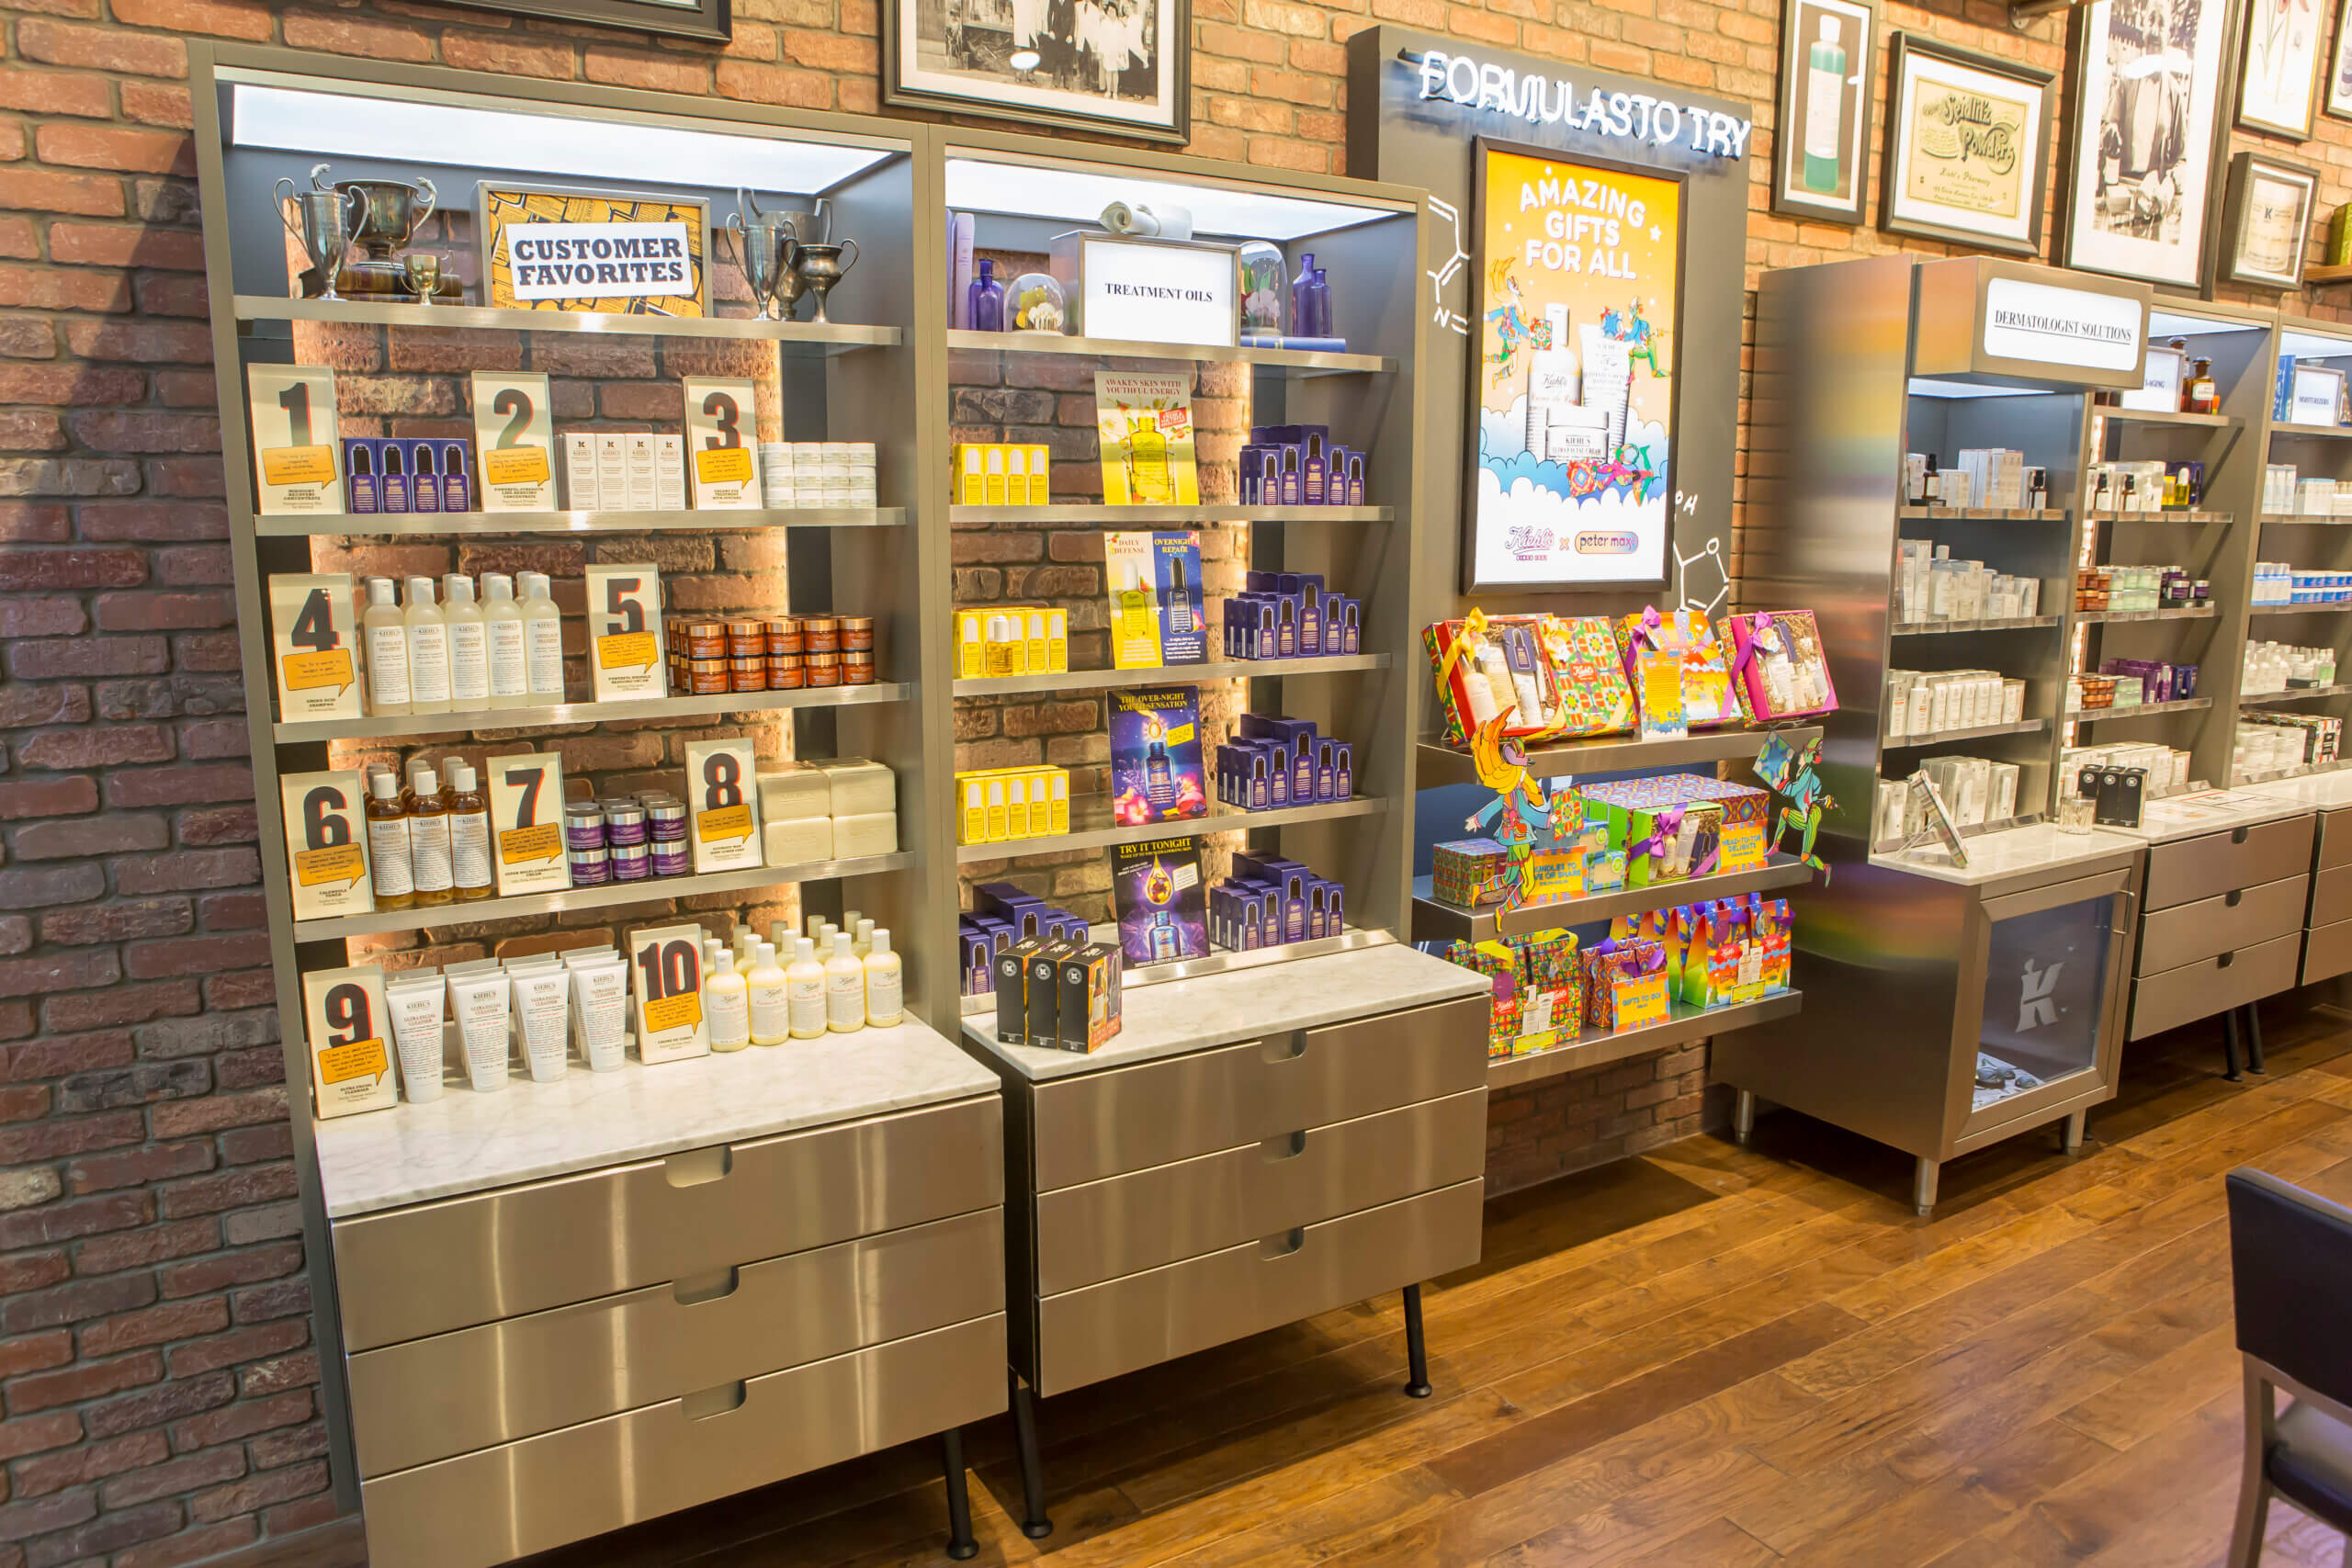 Nationwide Fixture Installations Inc Kiehls Case Study Millwork Packages Retail Rollouts Shop-in-Shop Signage Custom Installation Services